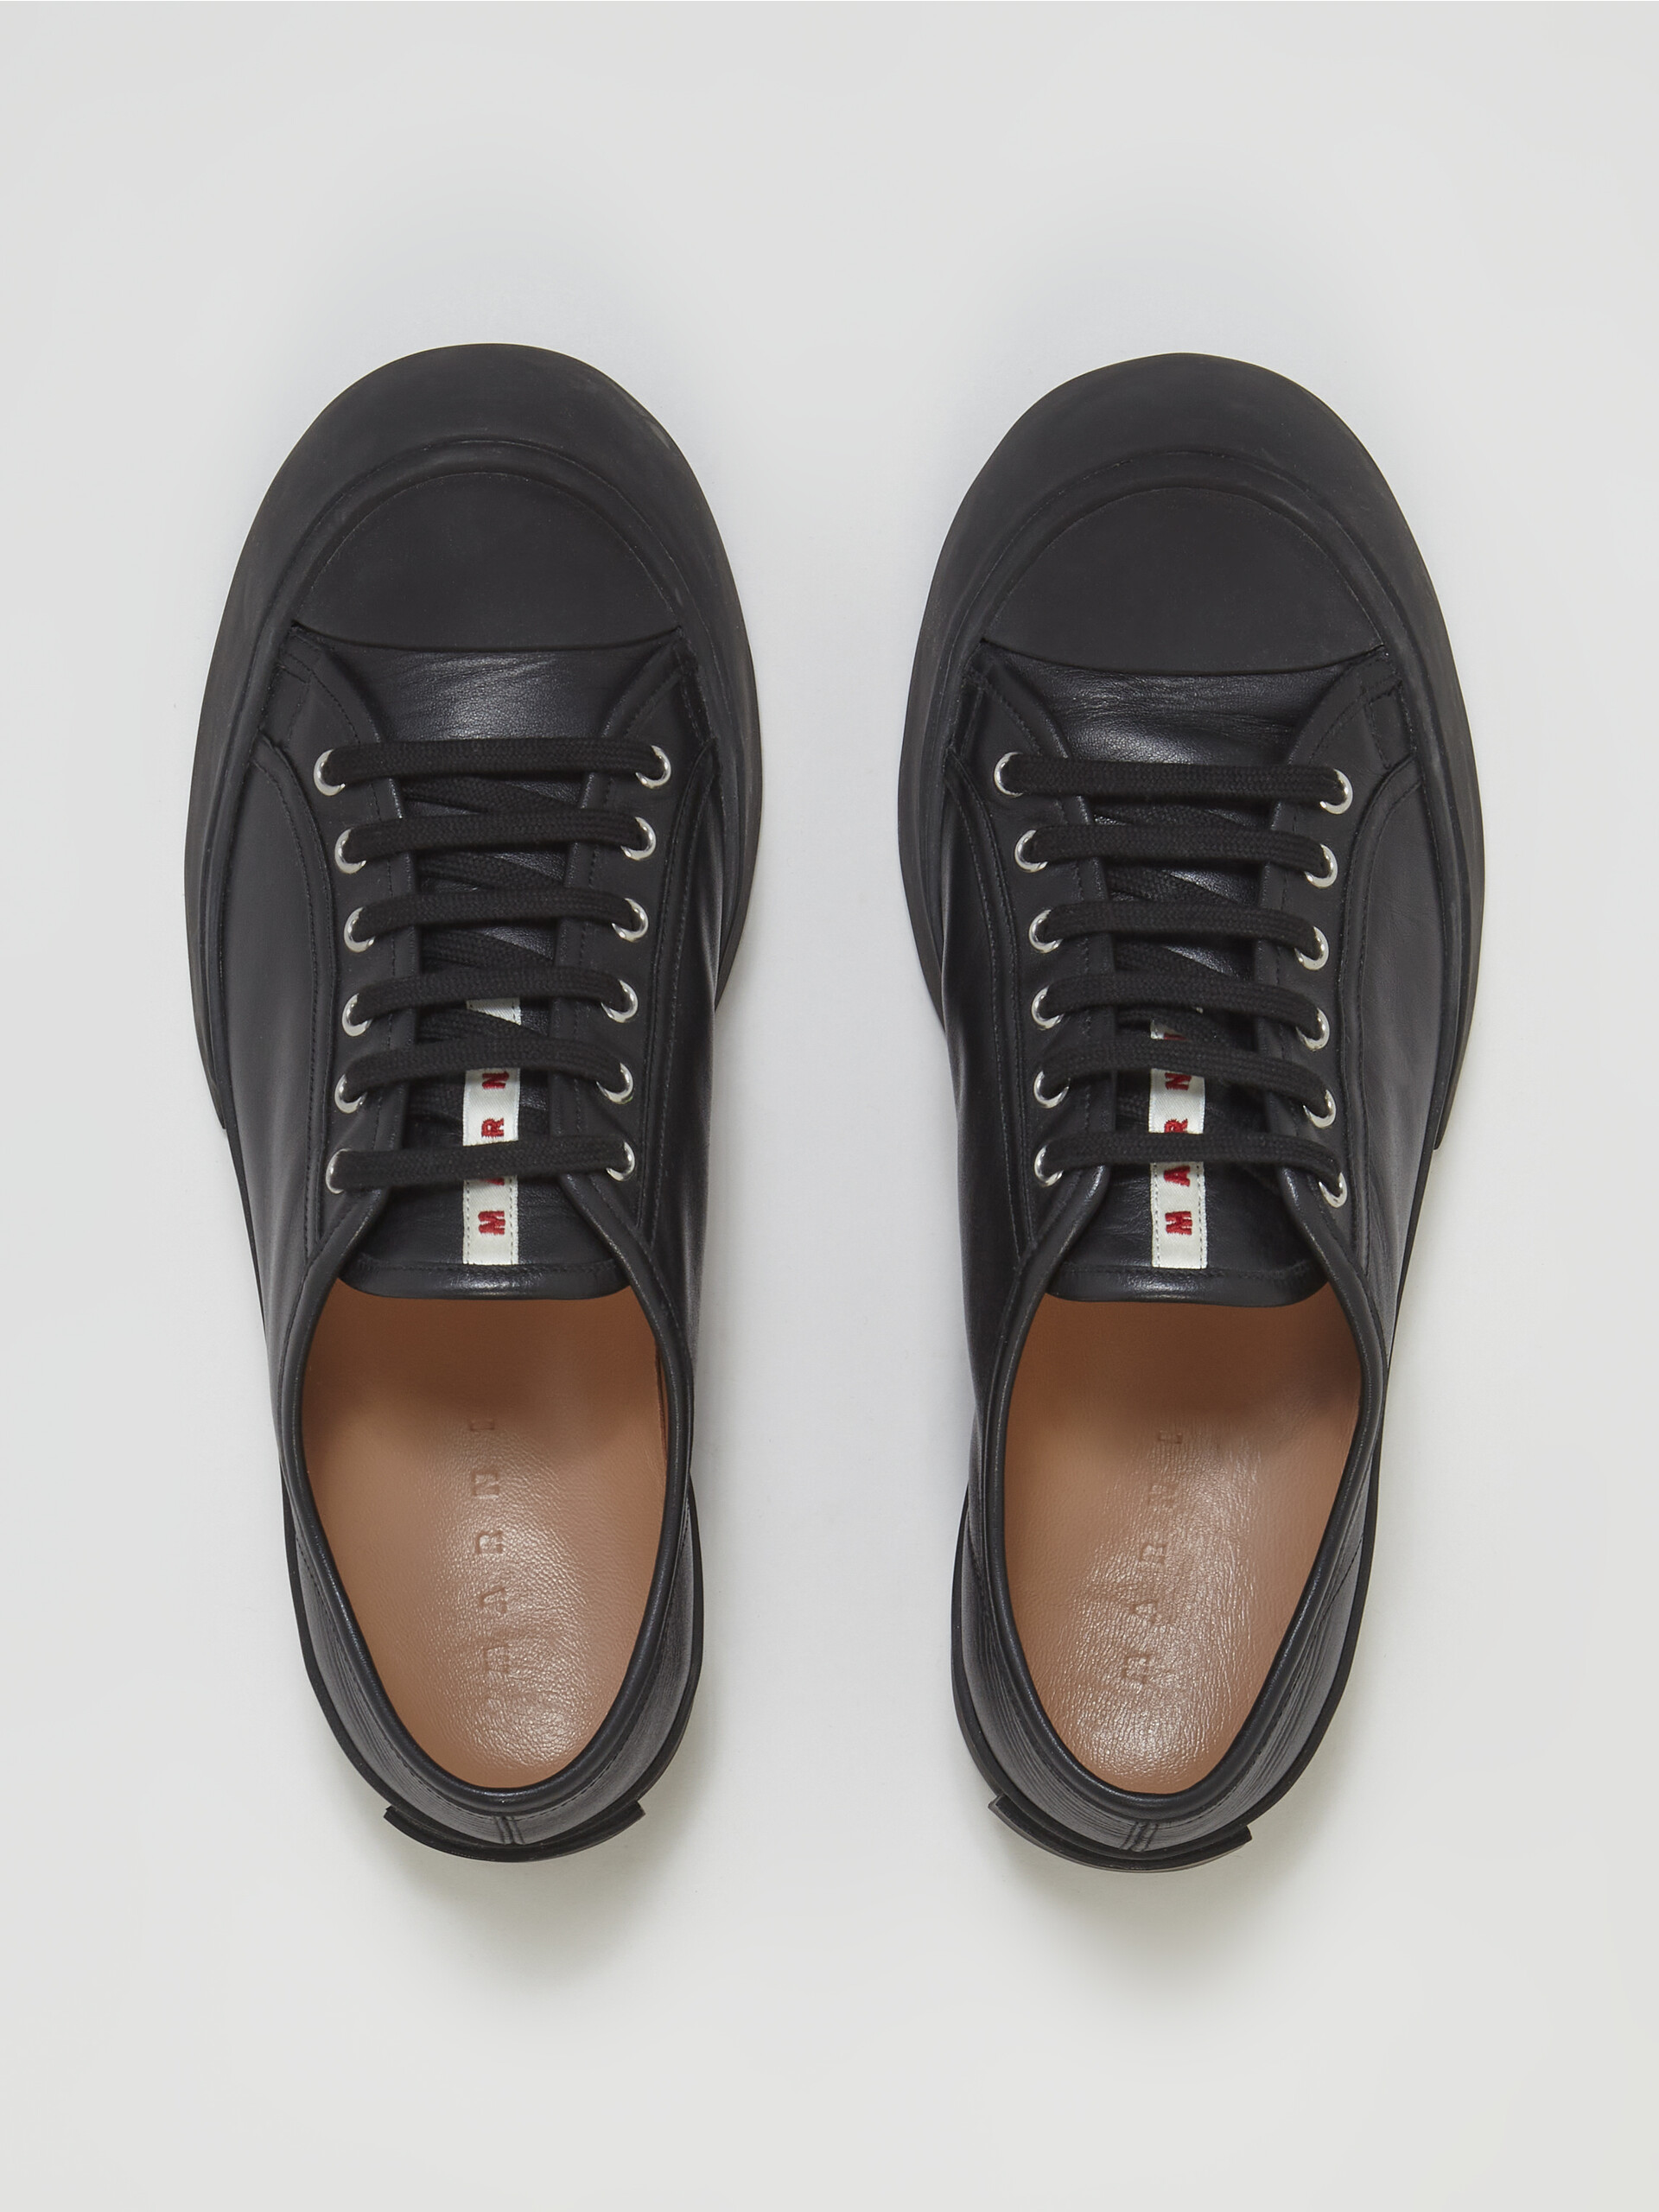 Soft calf leather PABLO sneaker - Sneakers - Image 4